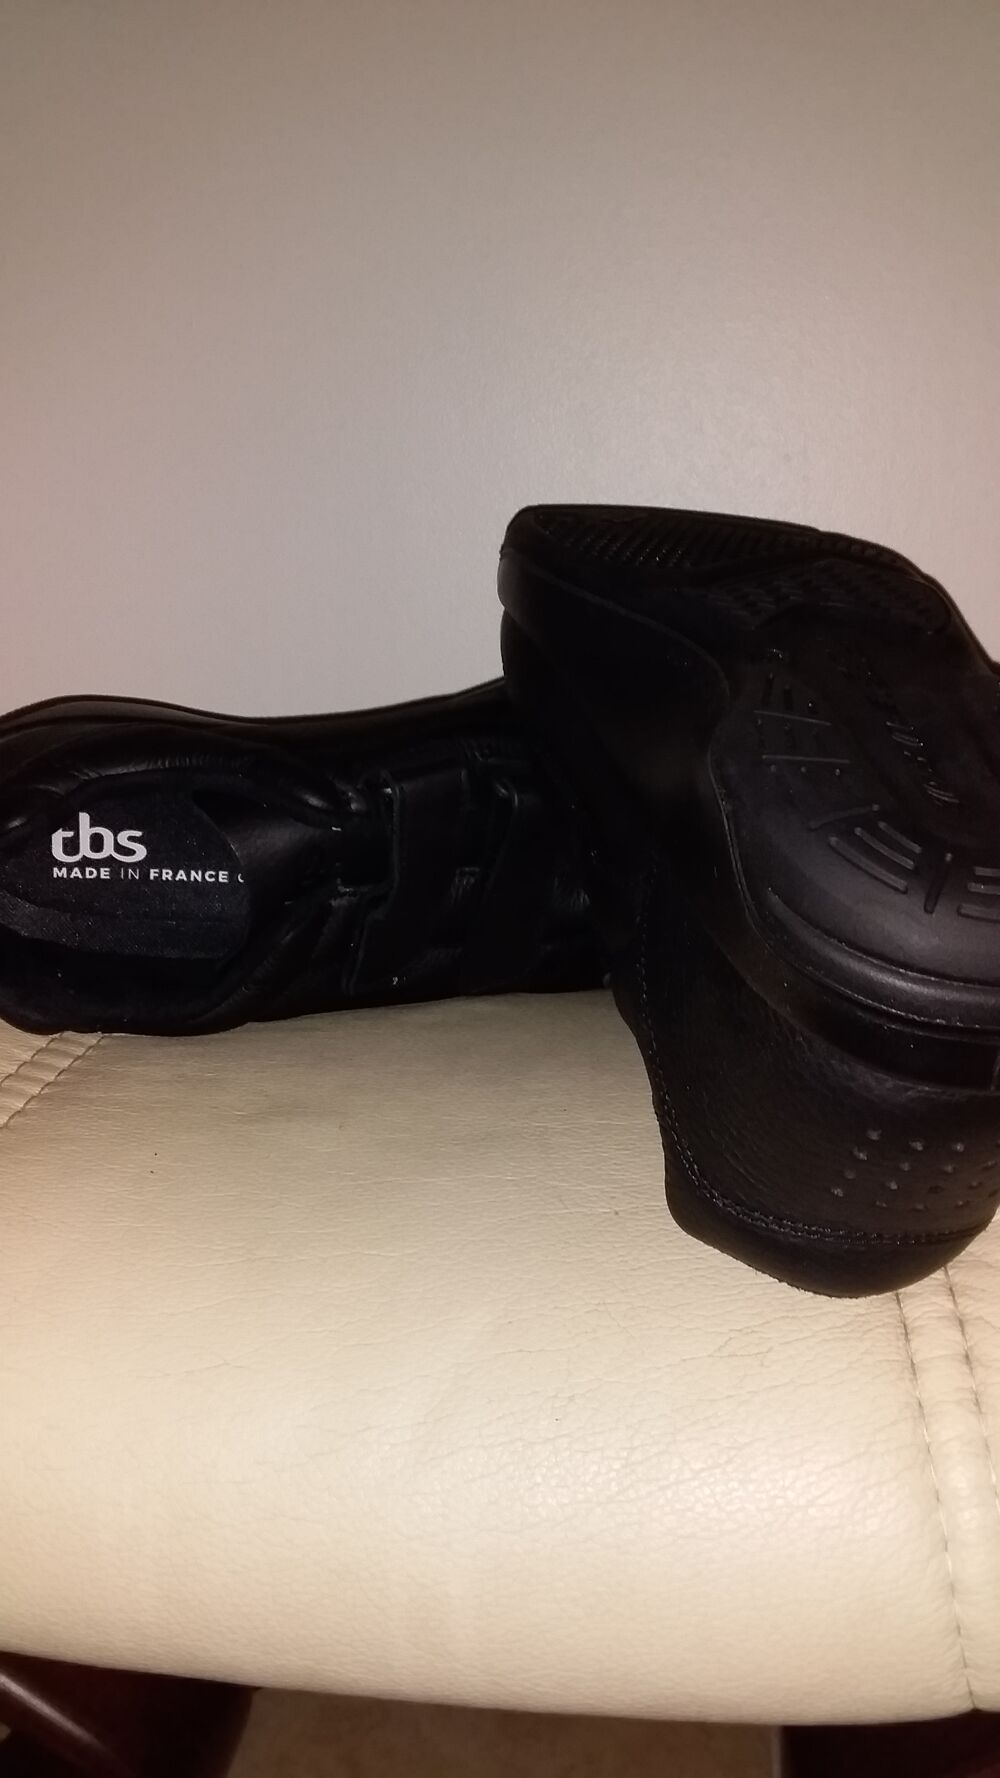 TBS homme Chaussures